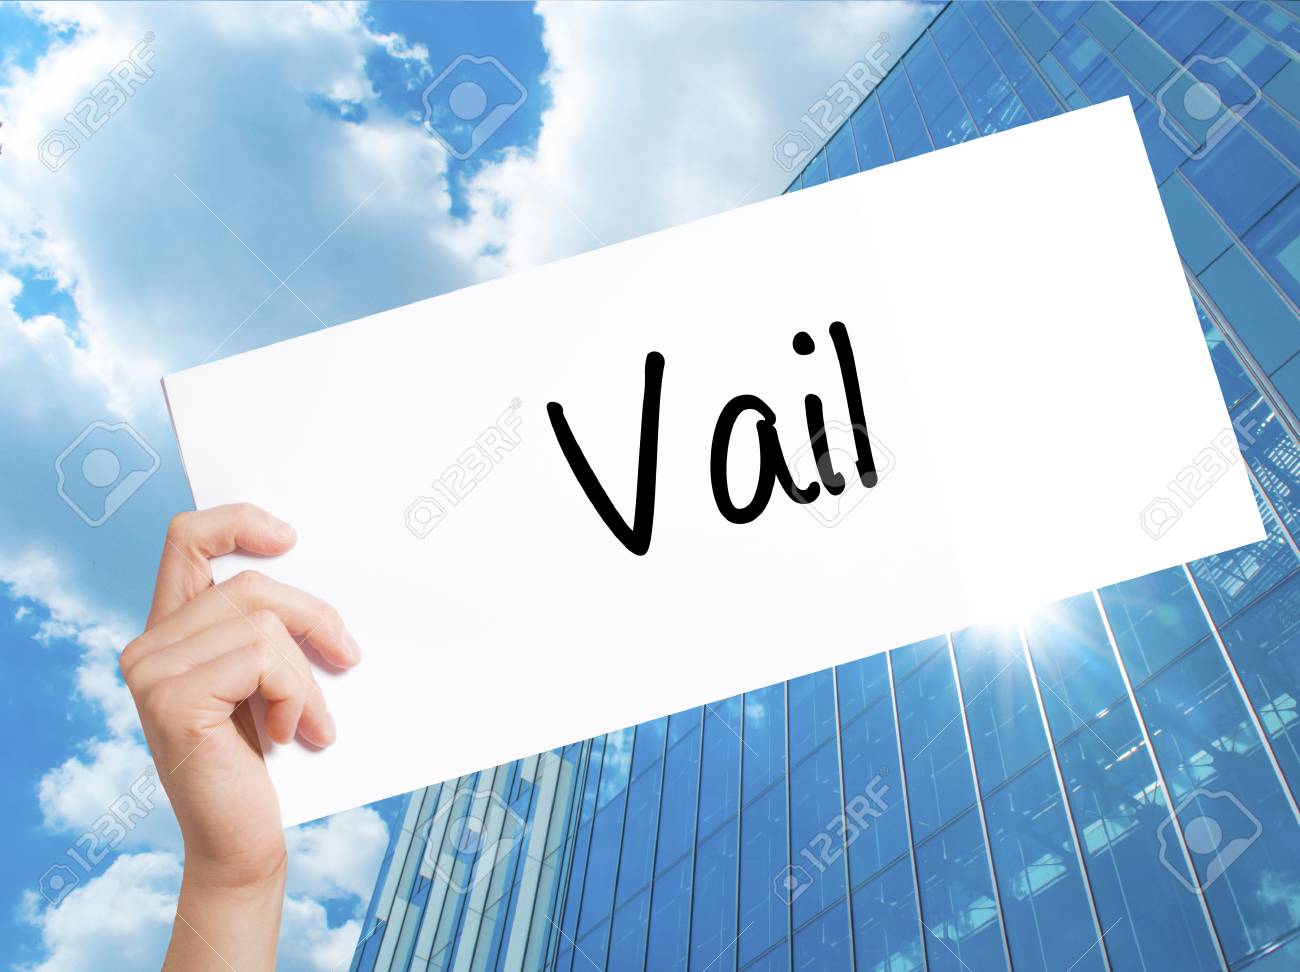 Vail Sign On White Paper Man Hand Holding With Text